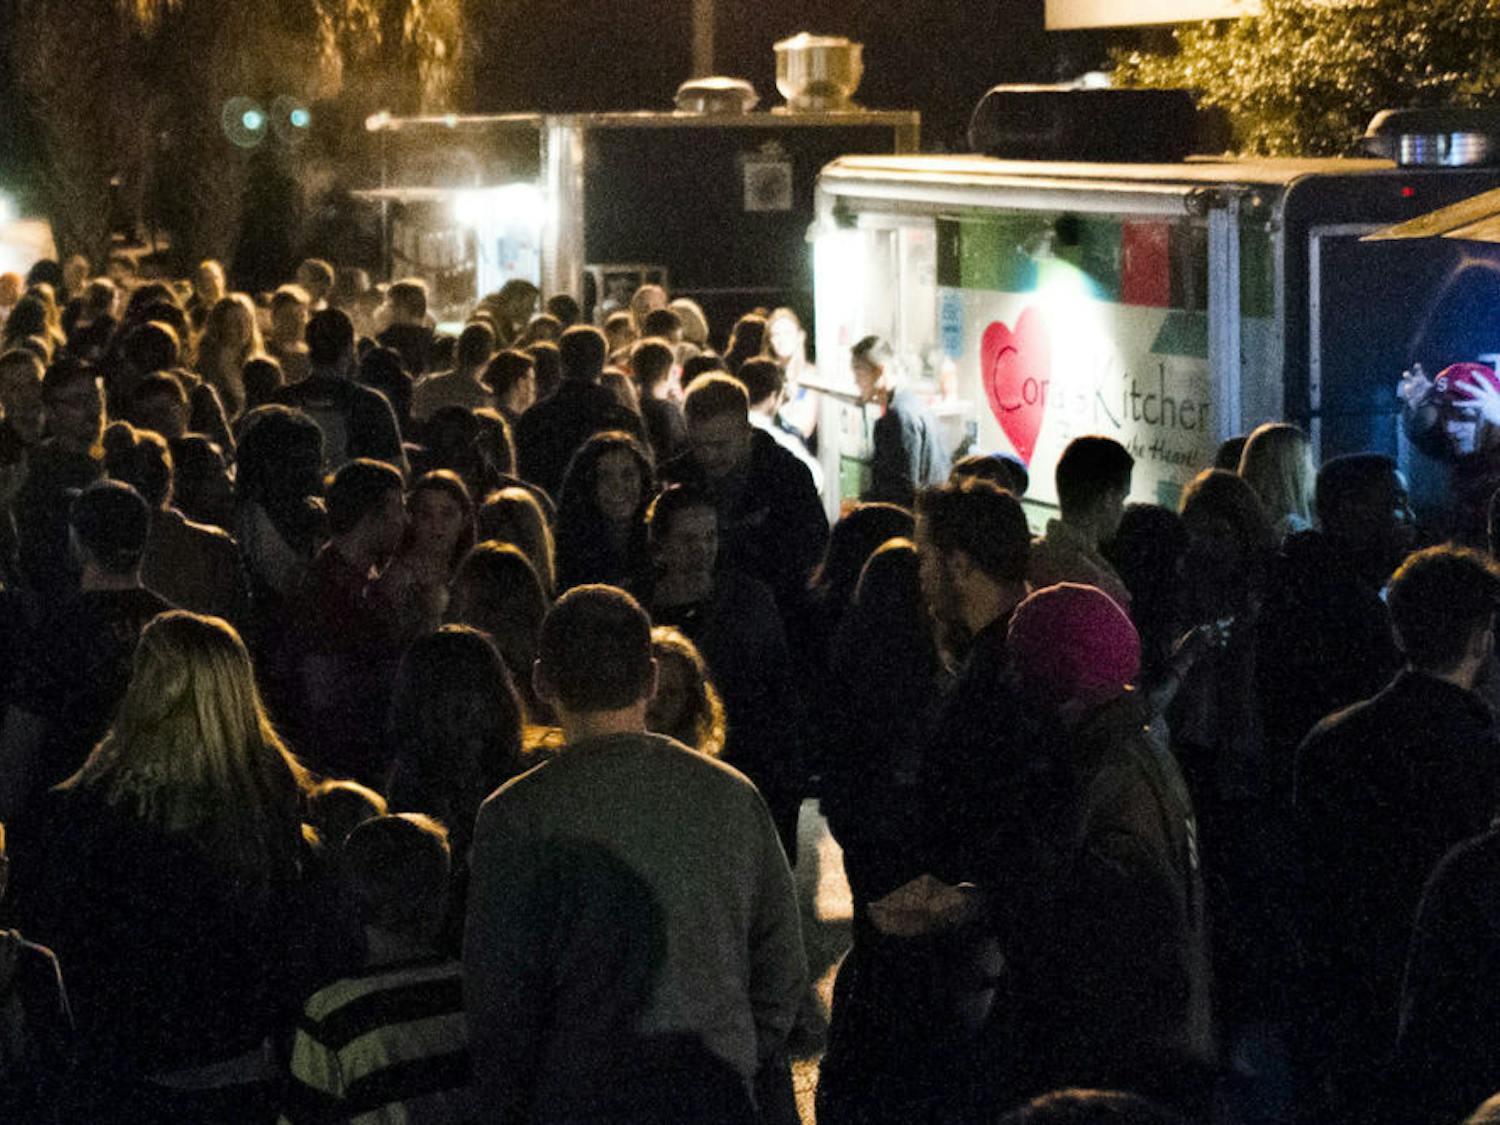 Attendees wait in line for Cora's Kitchen food truck at the third-annual Original Gainesville Food Truck rally in January, 2016.